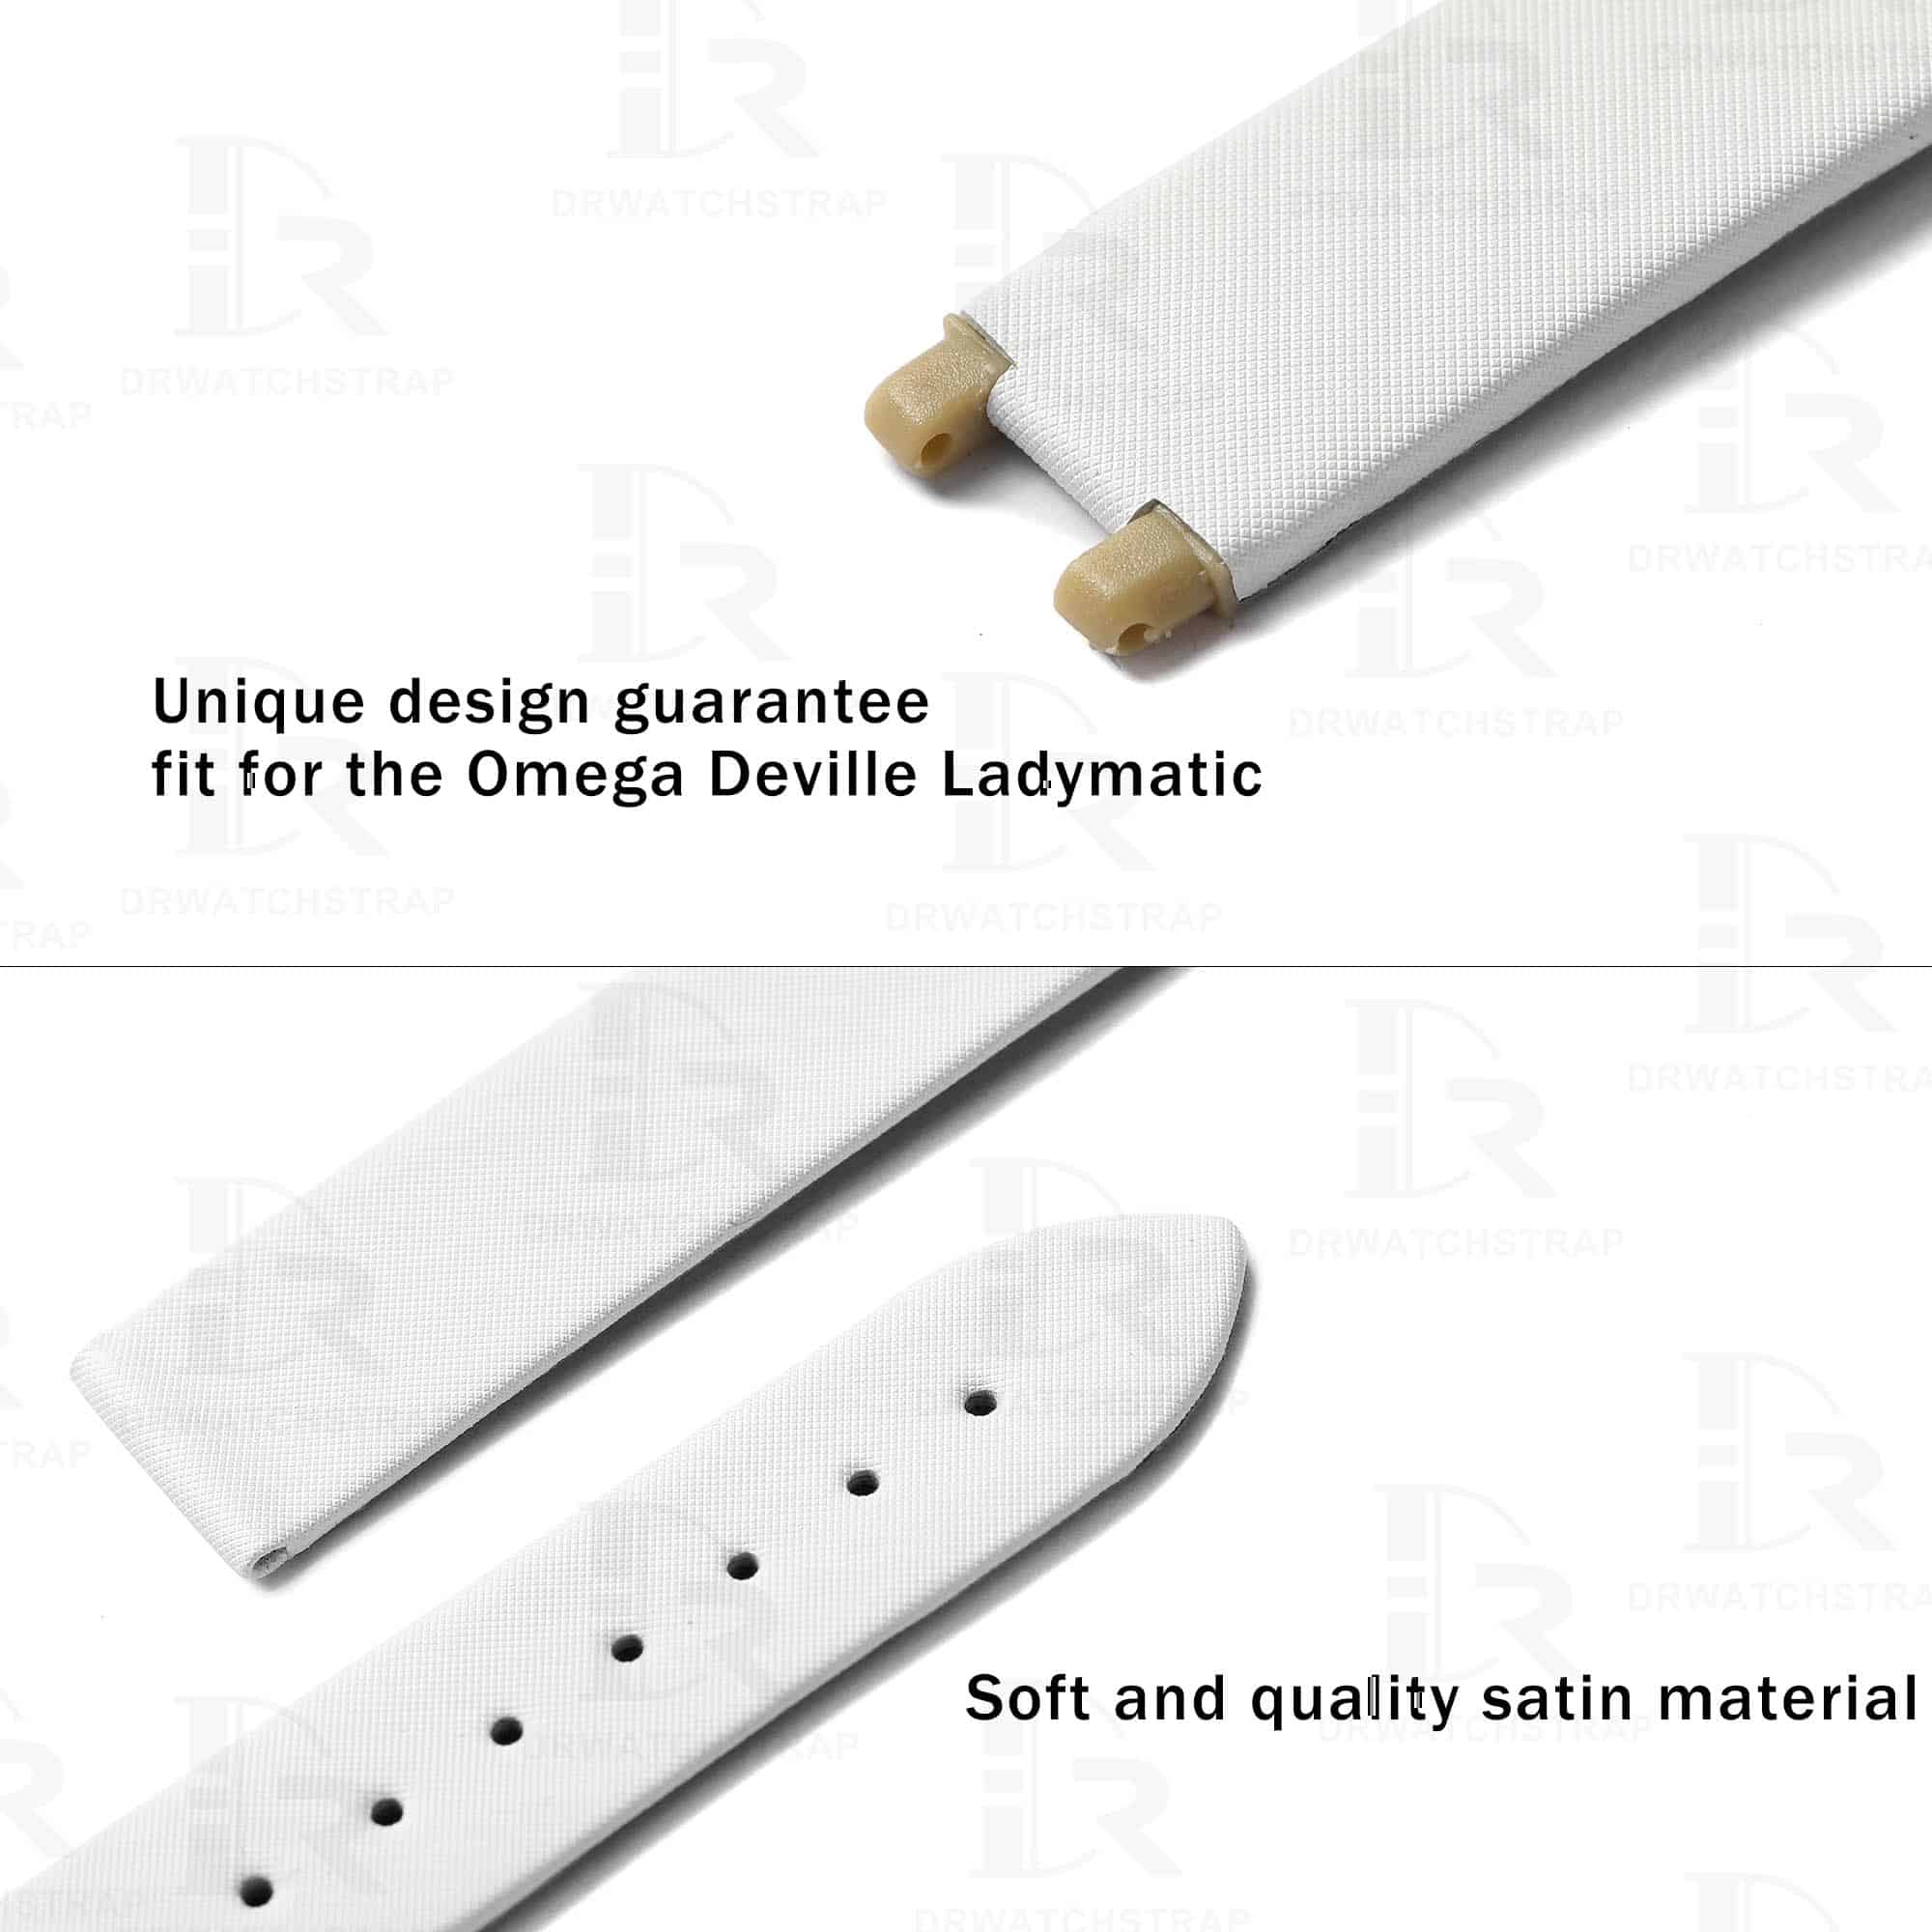 Unique design guarantee fit and high-quality Satin material